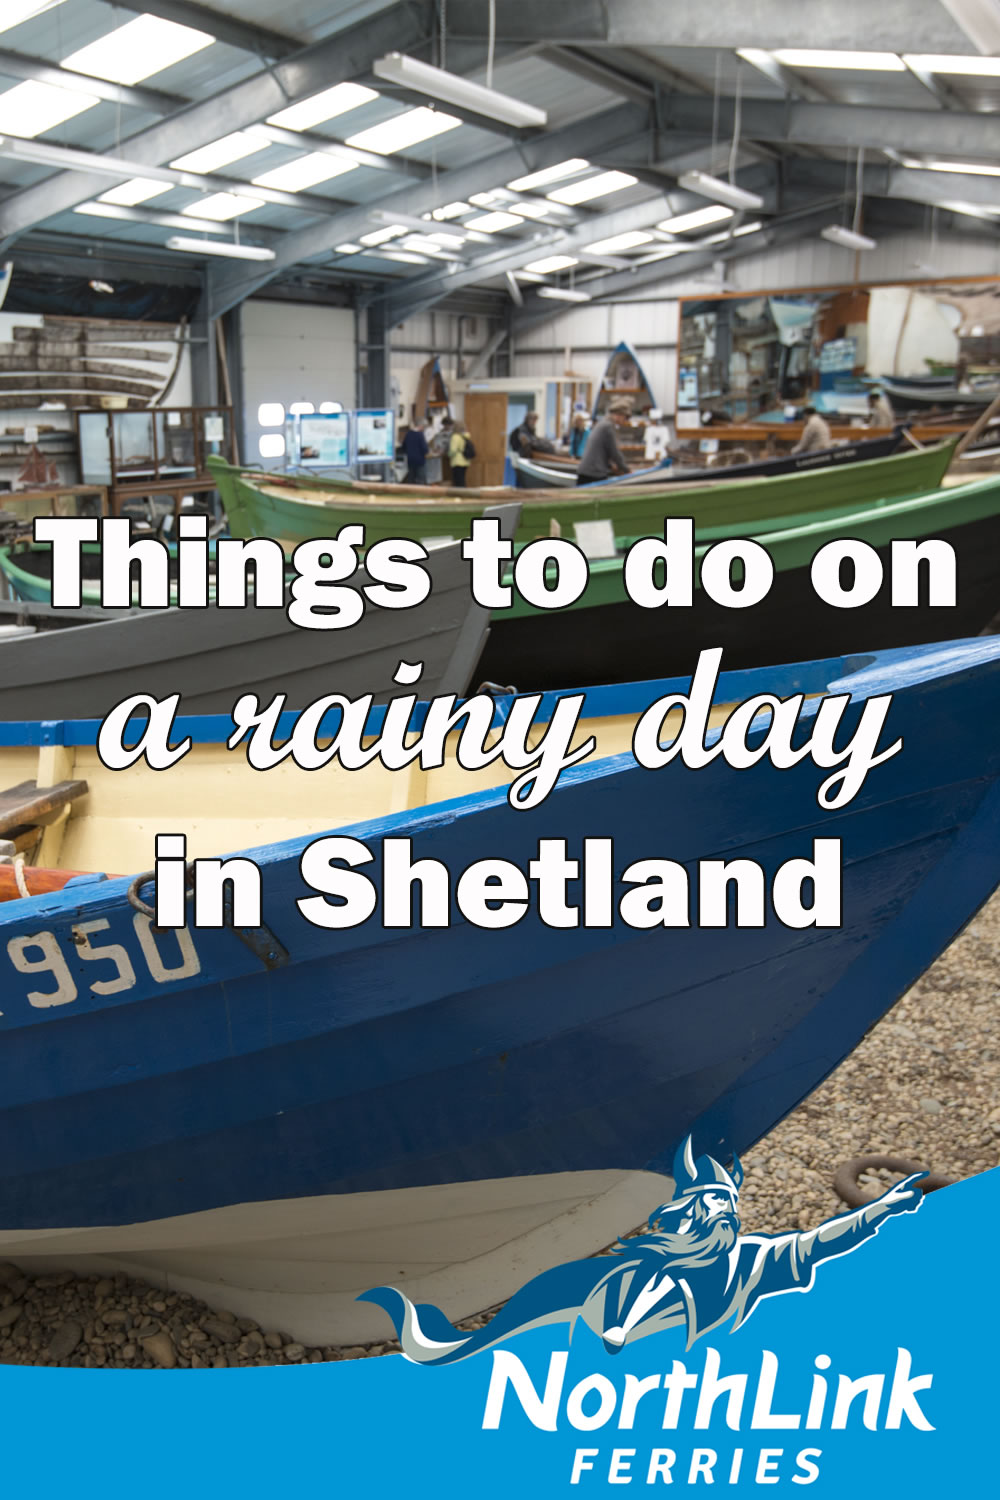 Things to do on a rainy day in Shetland